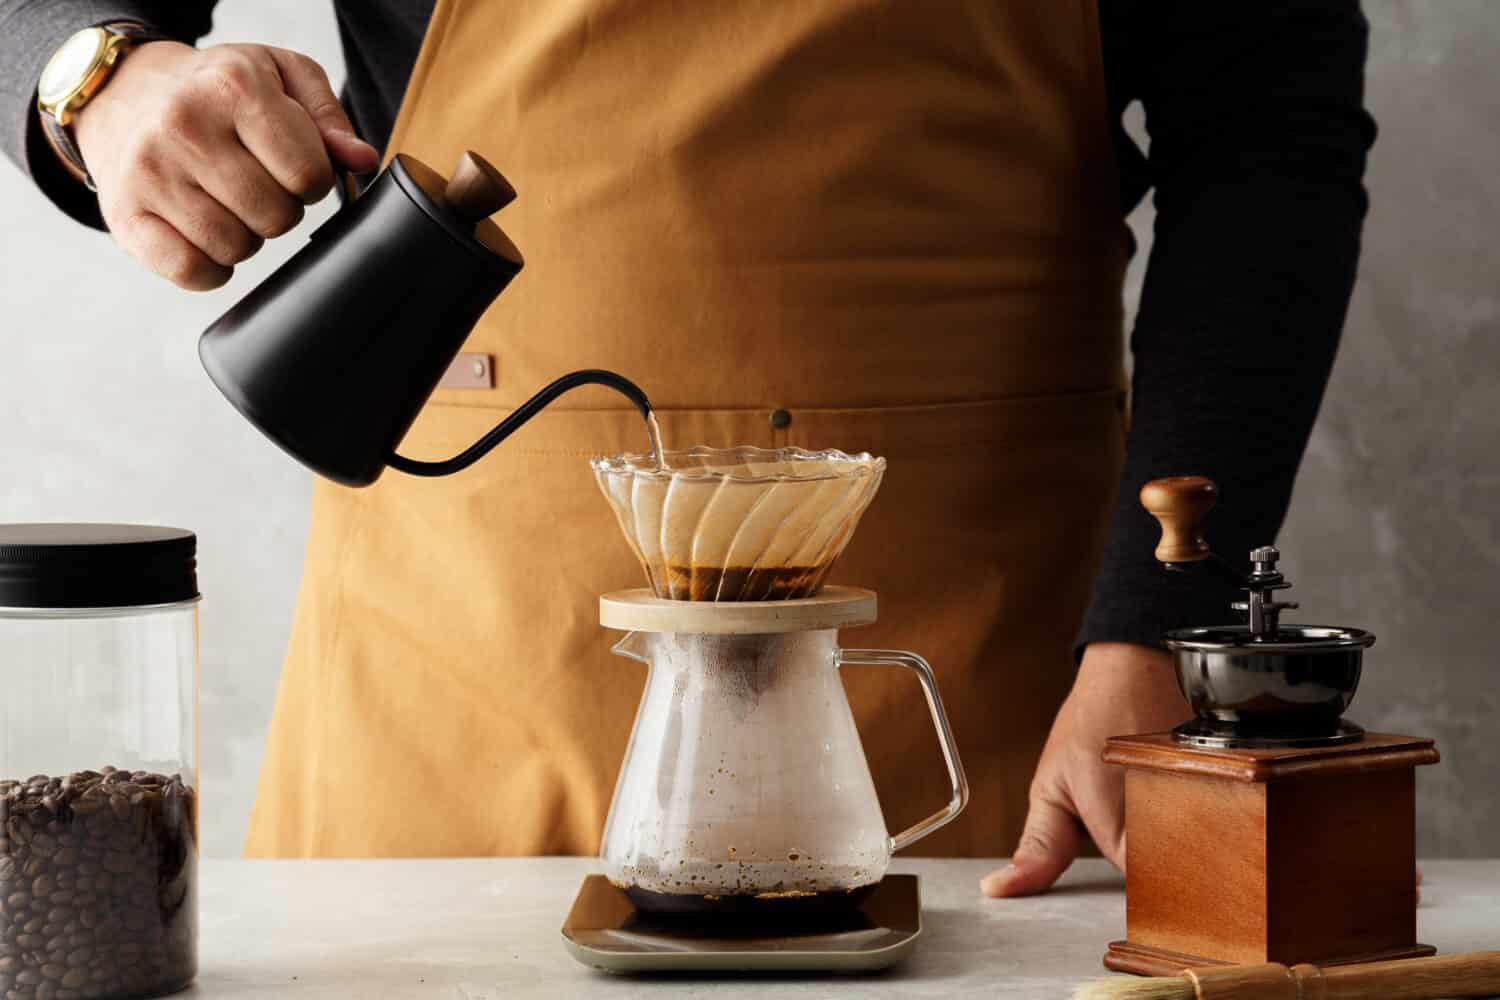 Men barista making a drip coffee, pouring hot water from kettle over a ground coffee powder